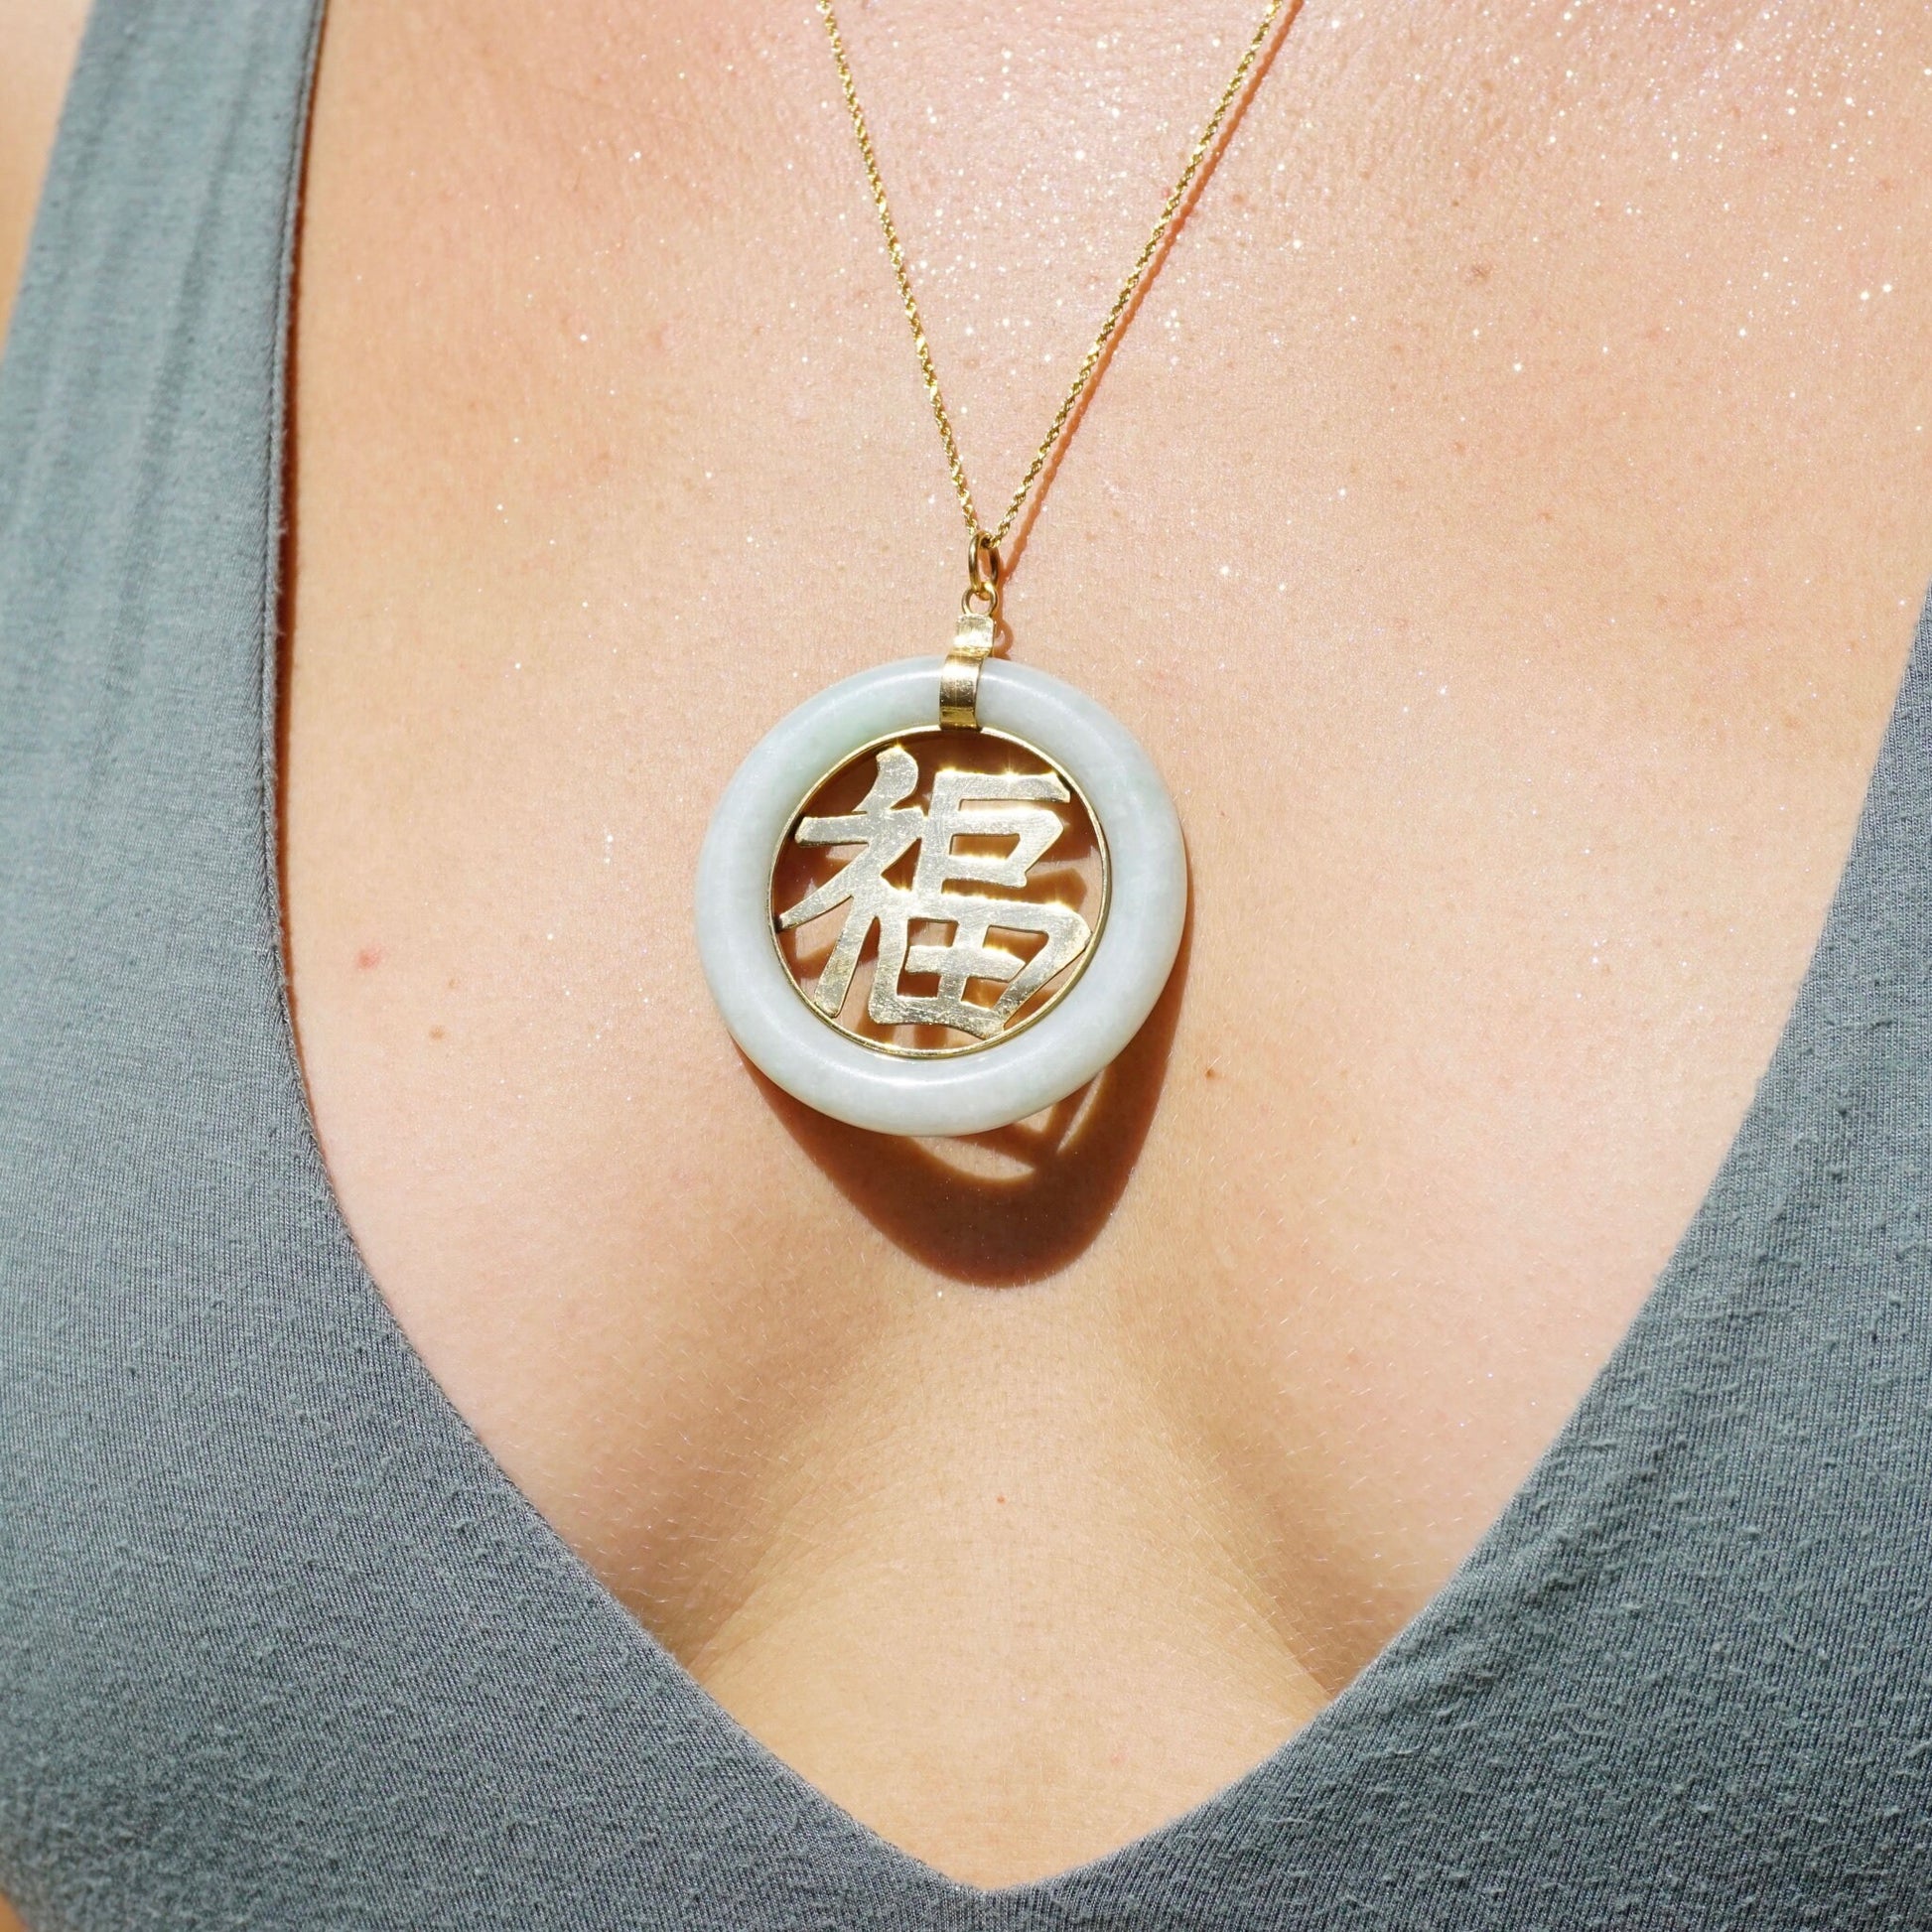 Vintage 14K gold jade Chinese symbol pendant necklace featuring a large, light green jade pendant carved with a Chinese character, suspended from a delicate gold chain against a woman's chest.